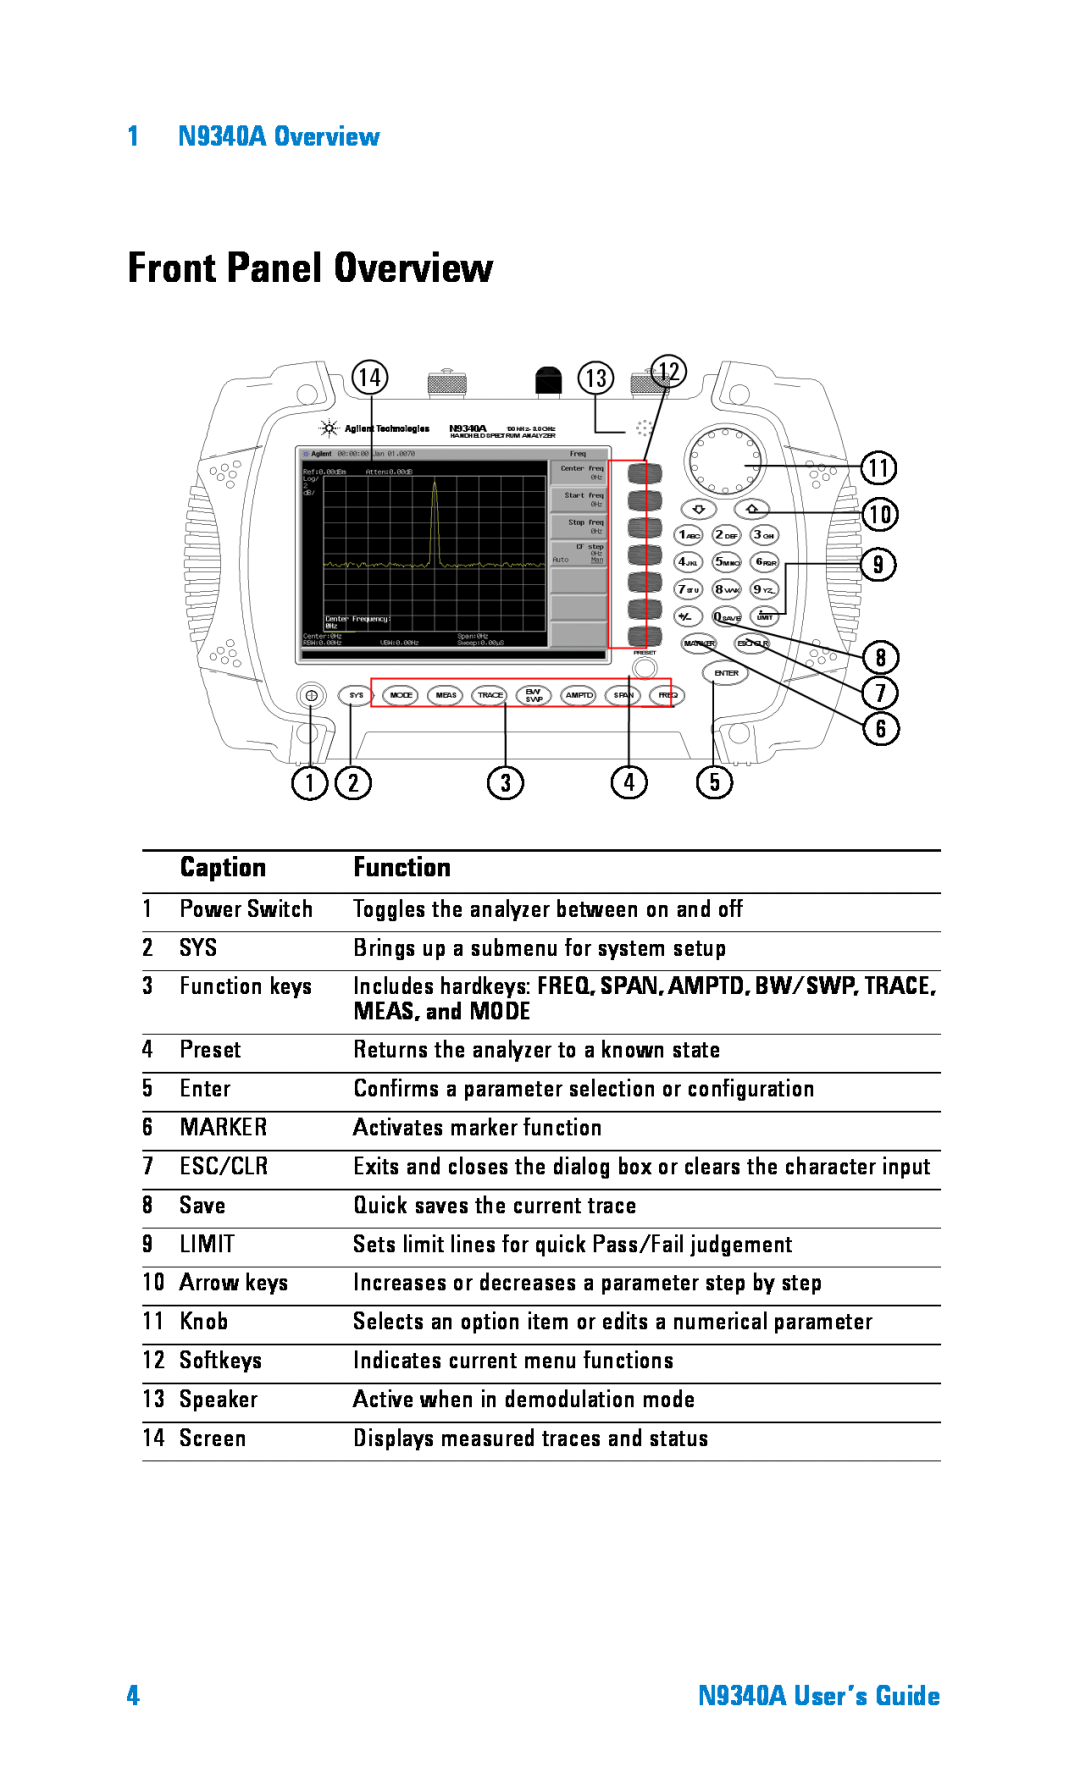 Agilent Technologies manual Front Panel Overview, Caption, Function, 1 N9340A Overview, MEAS, and MODE 